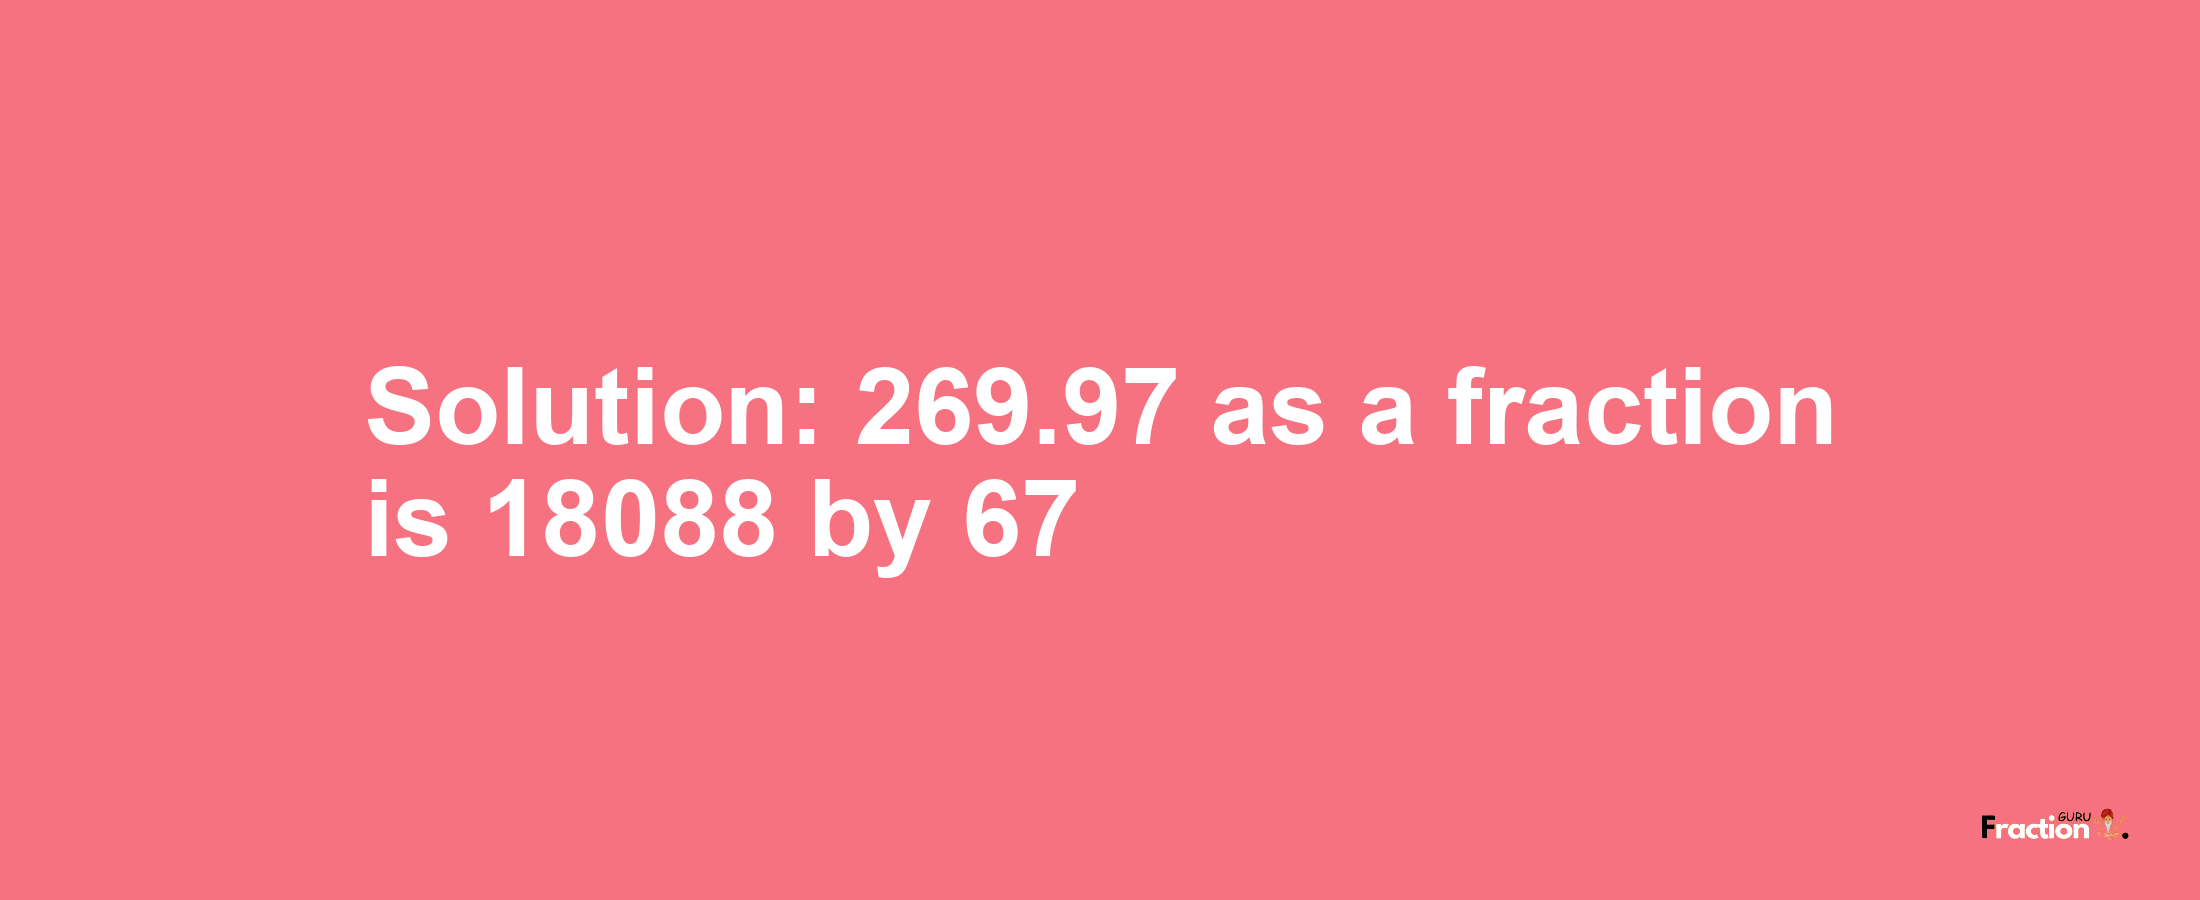 Solution:269.97 as a fraction is 18088/67